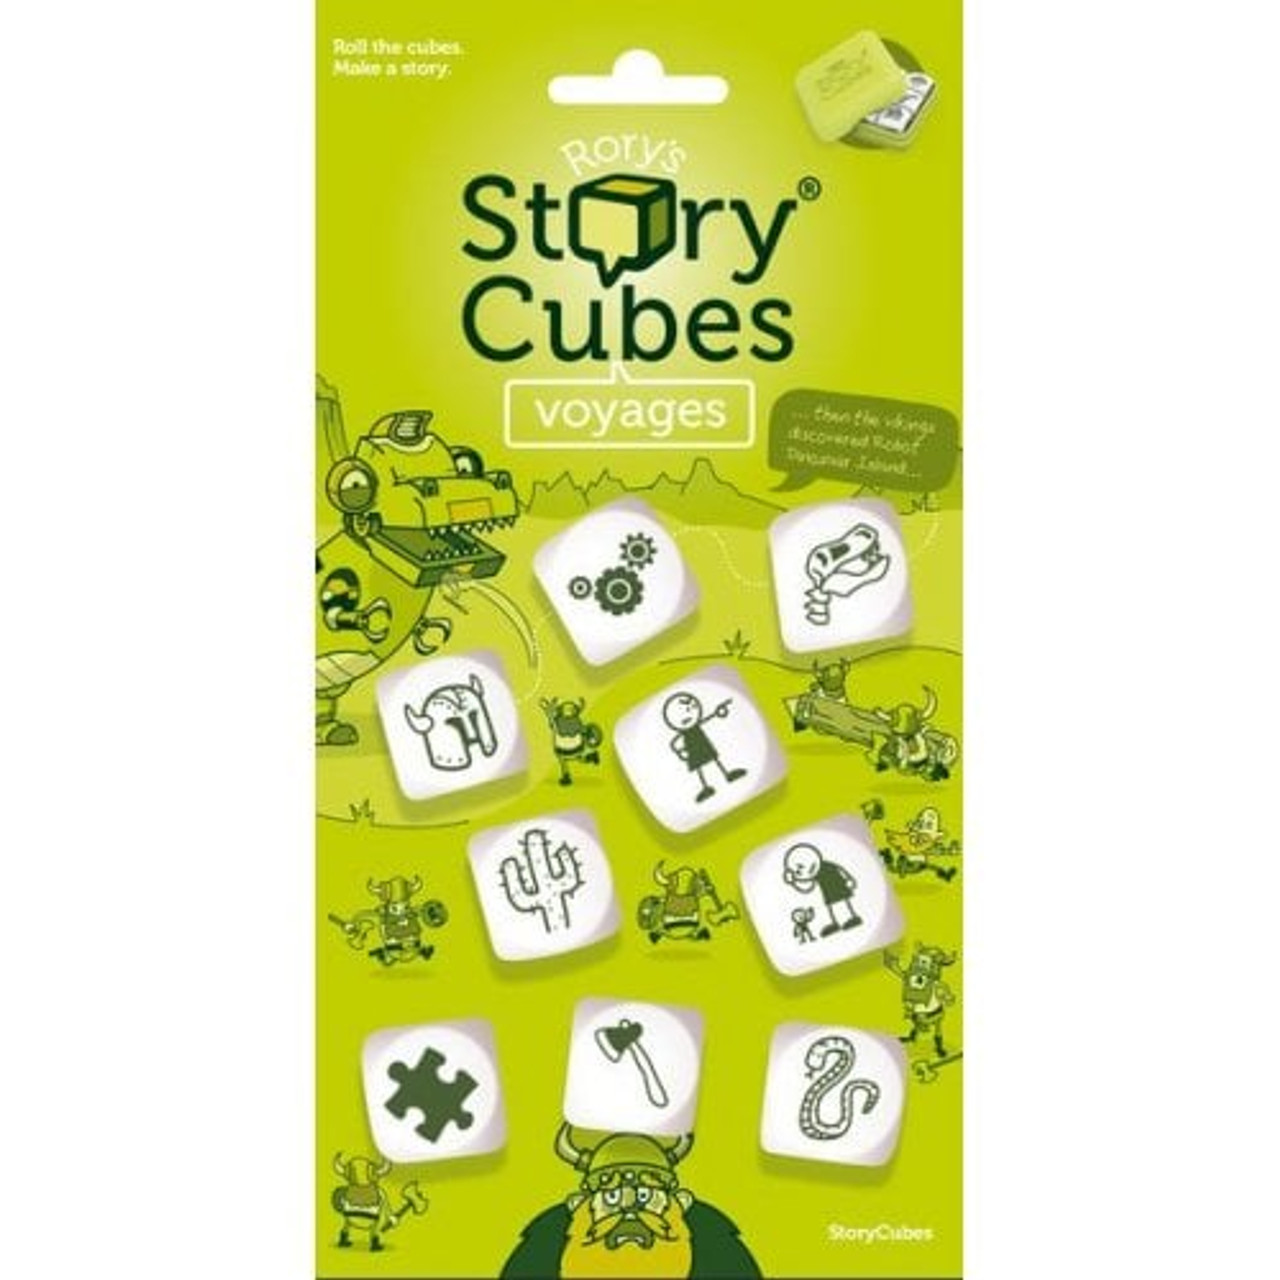 Rory's Story Cubes: Classic – Little Wish Toys